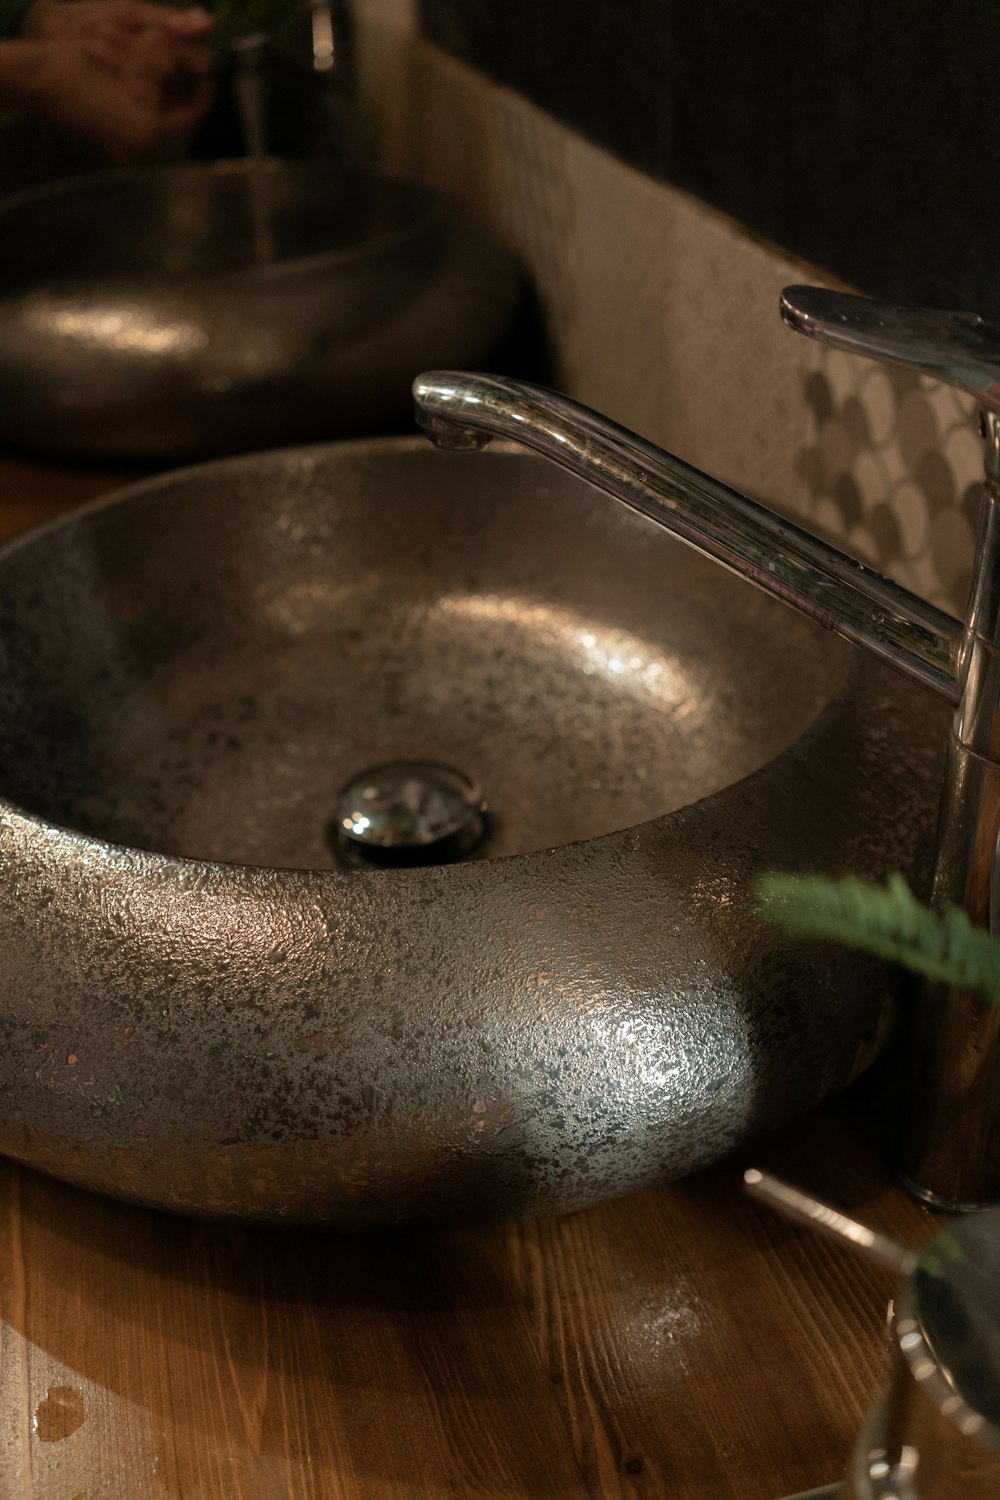 stainless steel faucet on brown ceramic sink